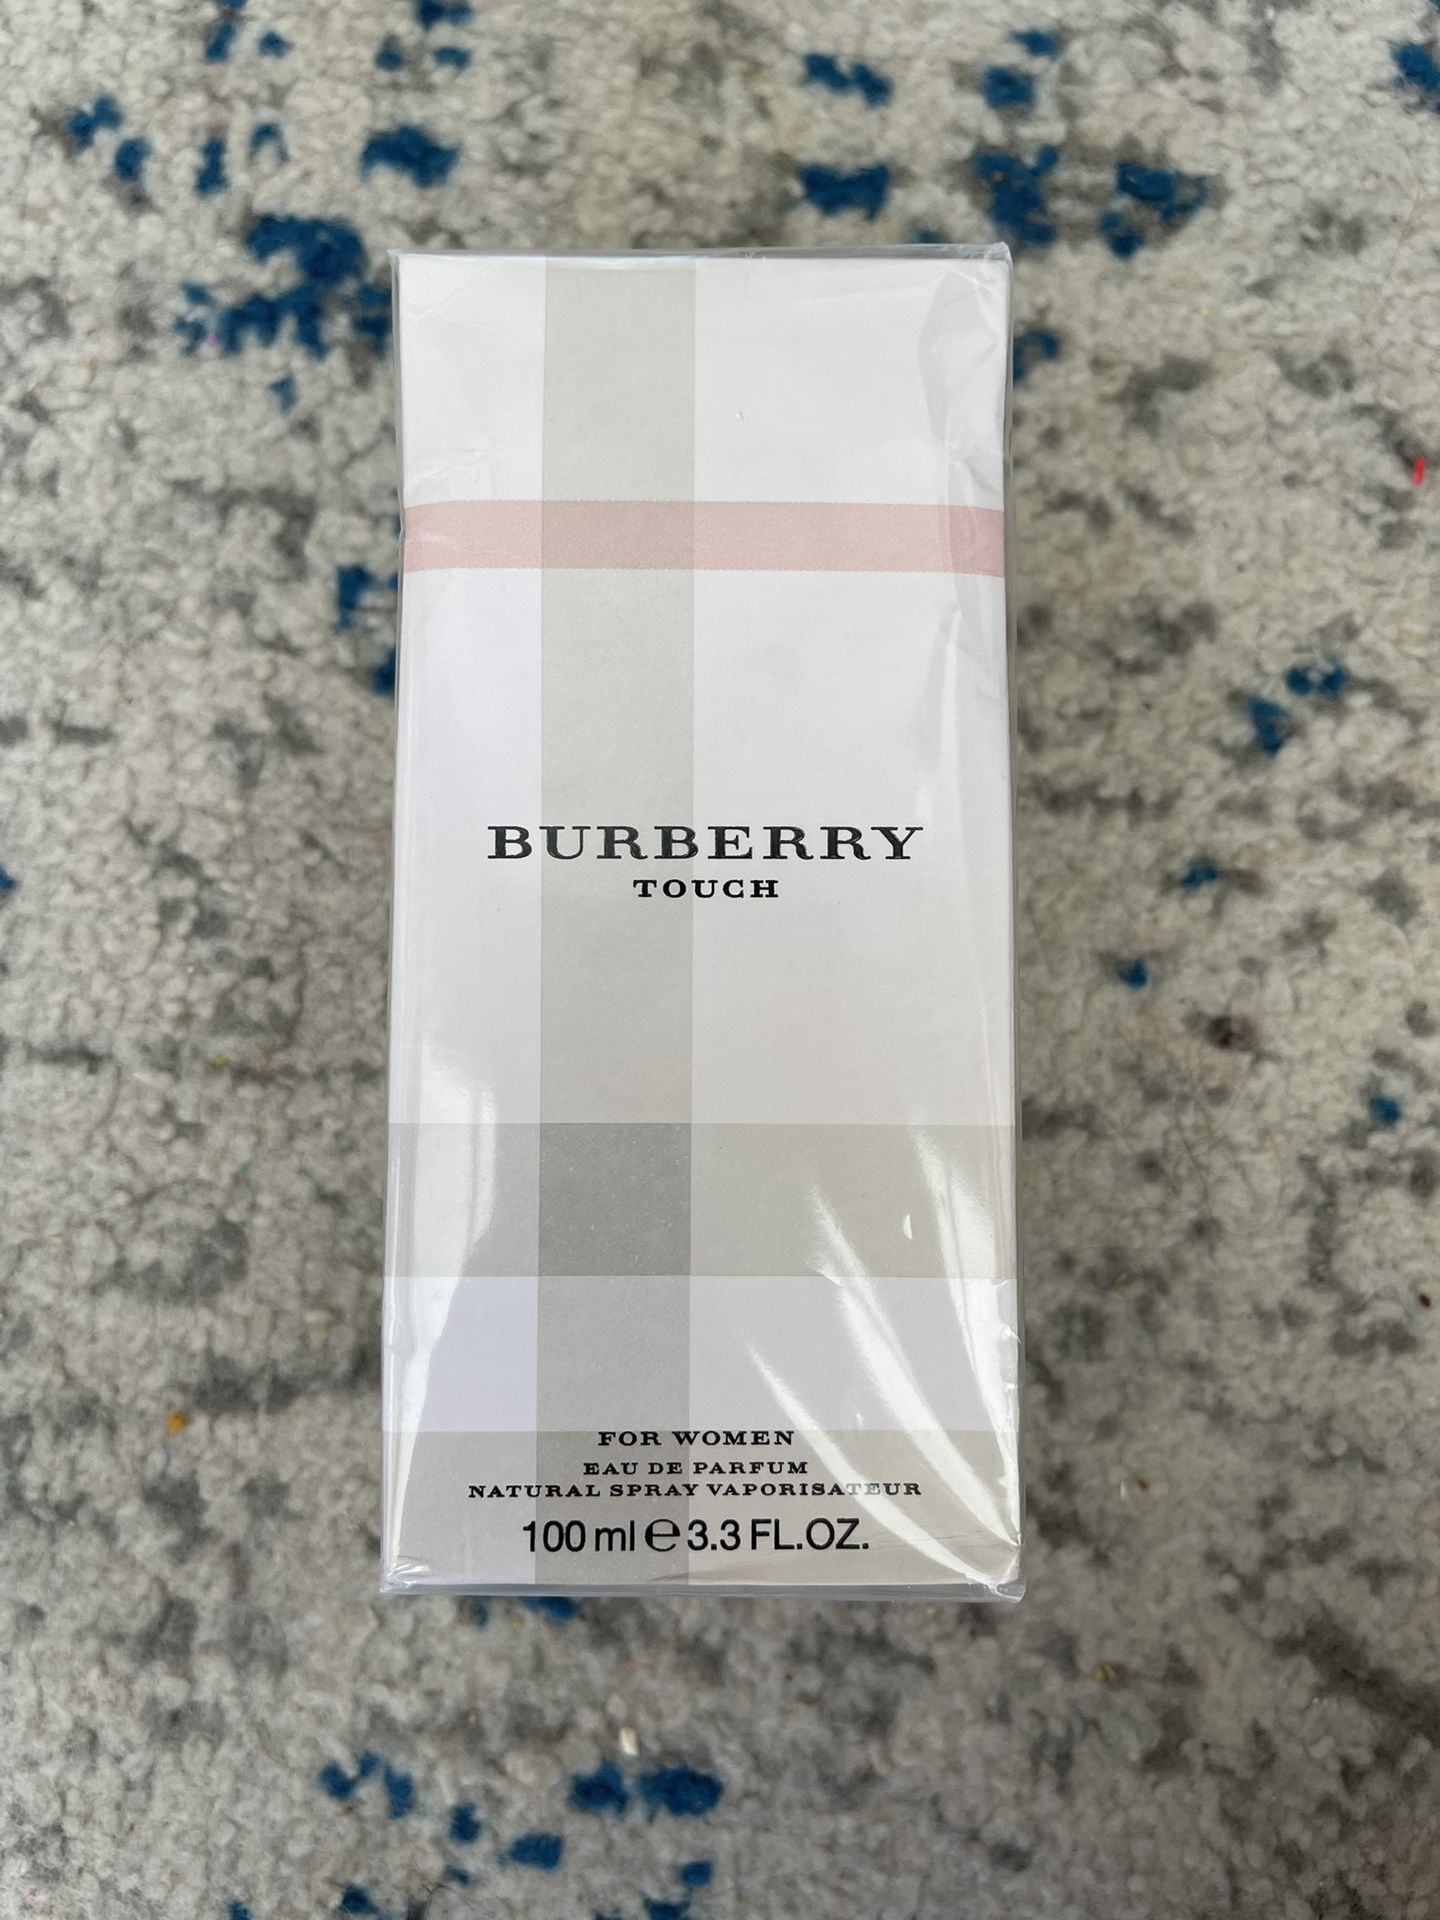 Perfum Burberry For Her